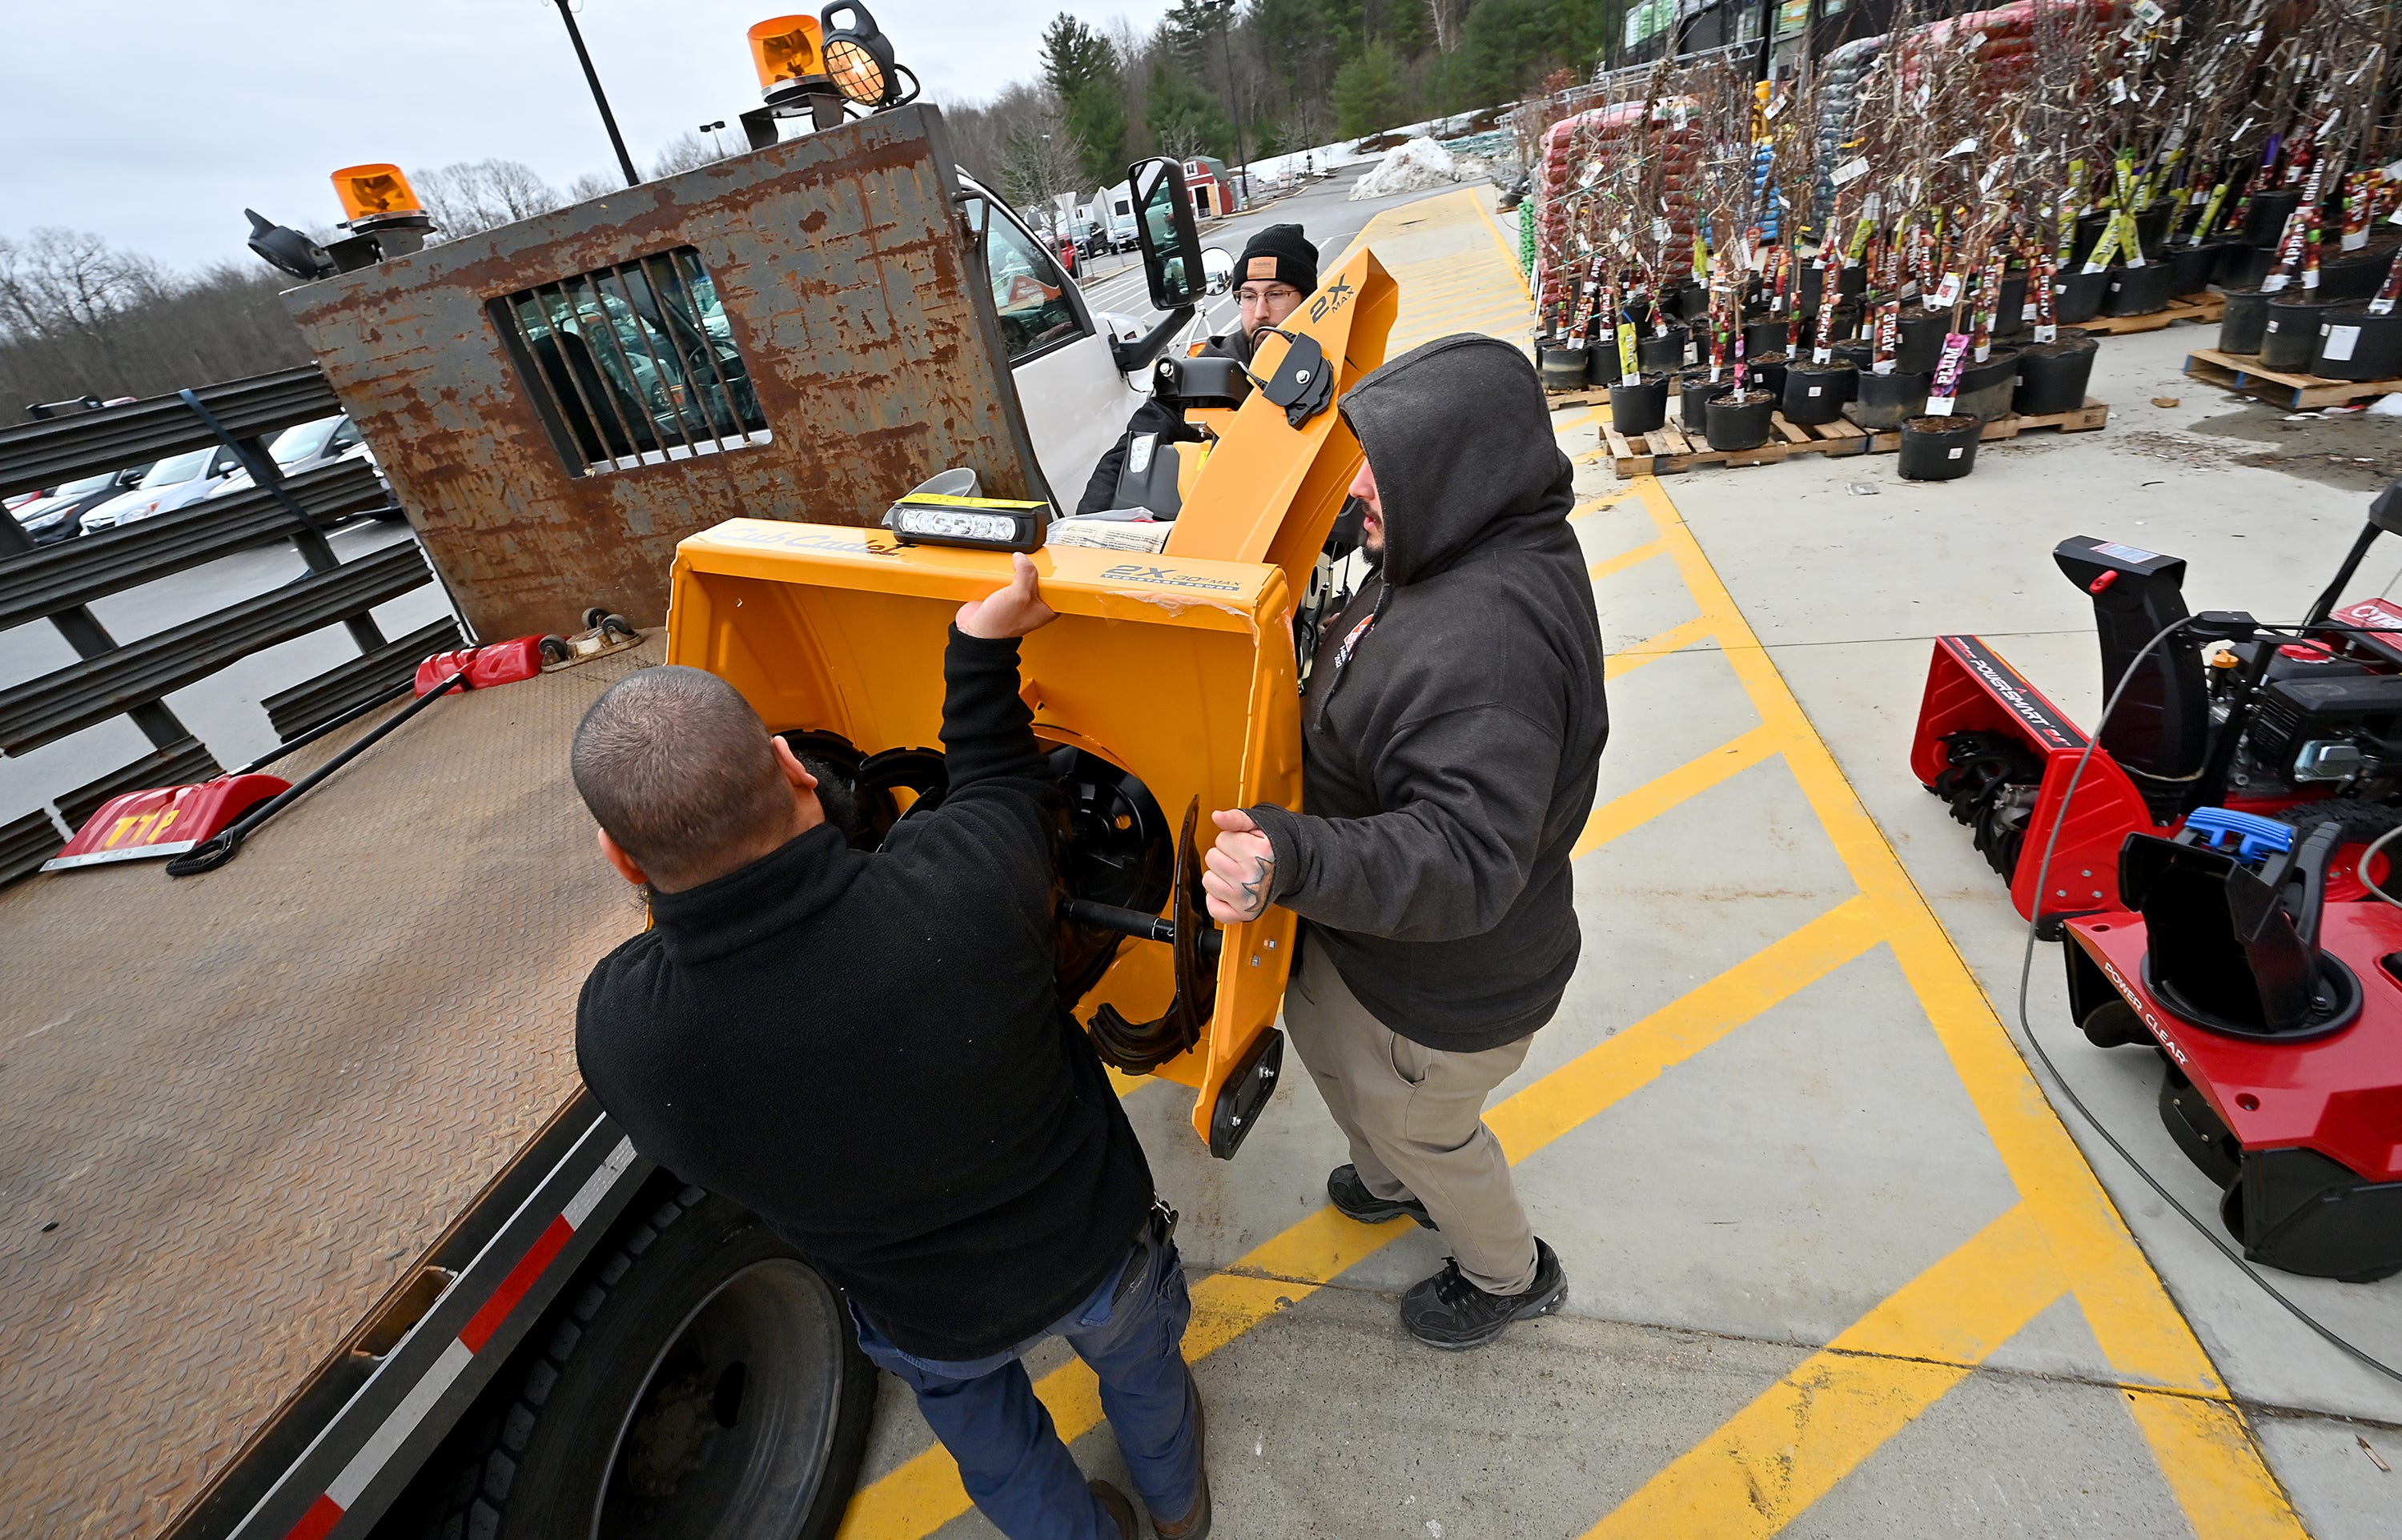 Home Depot employees Matthew Bregman, back, and Josh Marin, center, help Table Talk Pies Facilities Supervisor Marccus Rosado, front, load a large snowblower onto a truck Monday morning in Auburn.